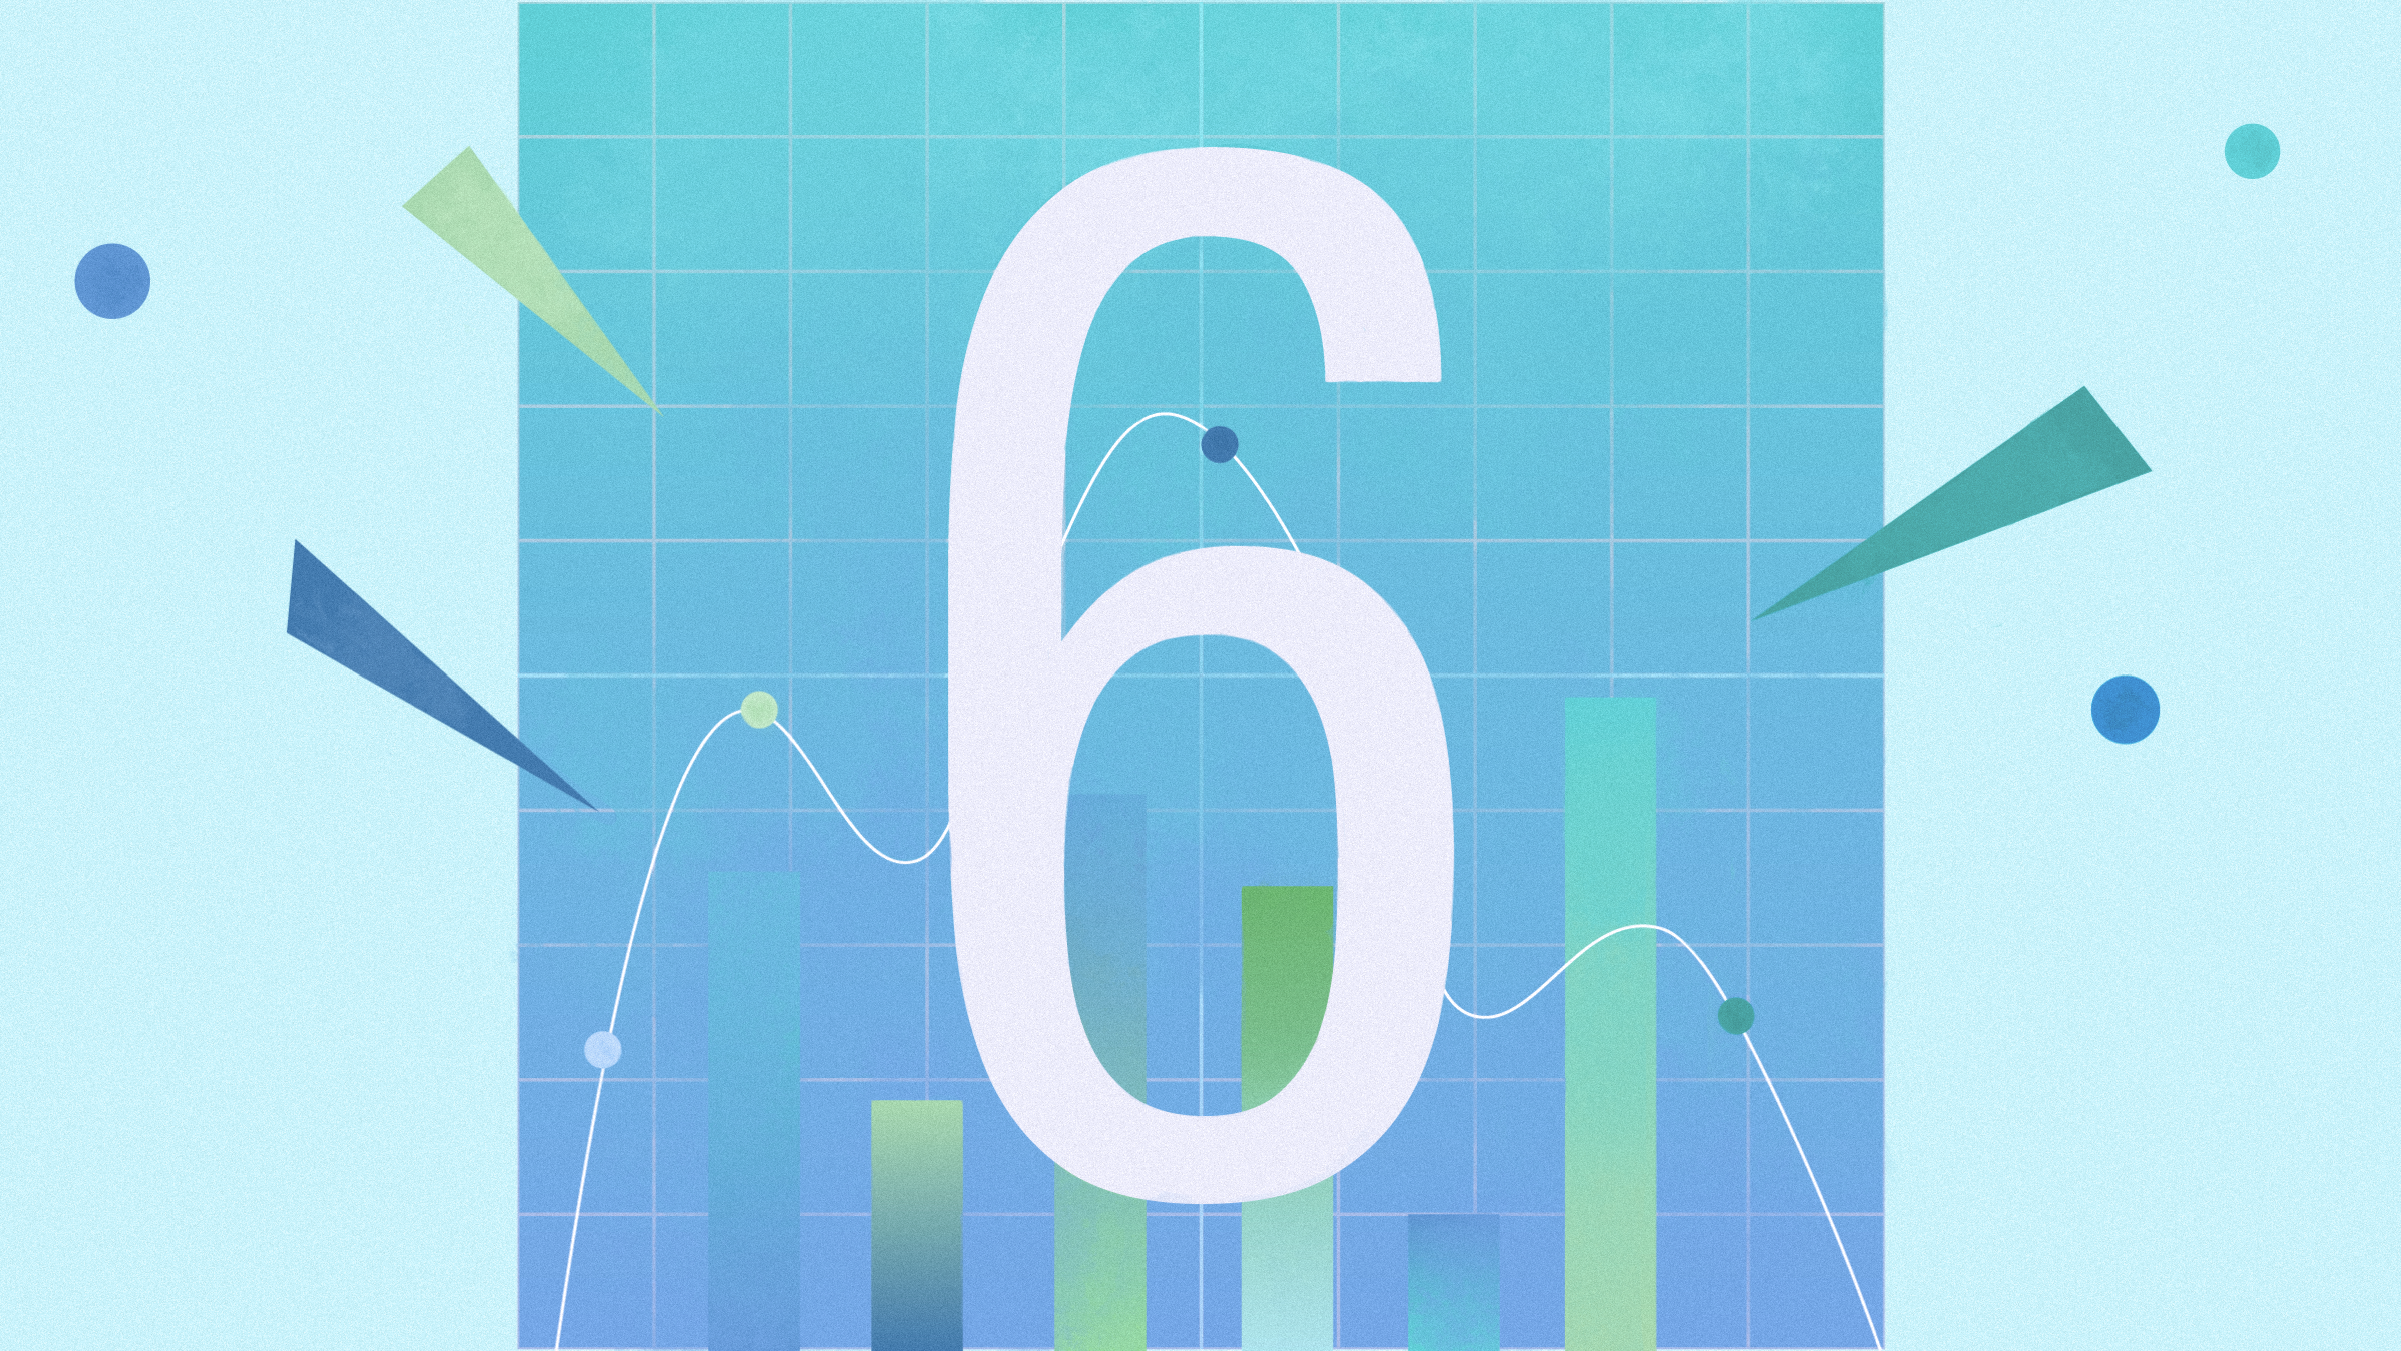 Illustration of the numeral 6 with bar graph and line chart elements